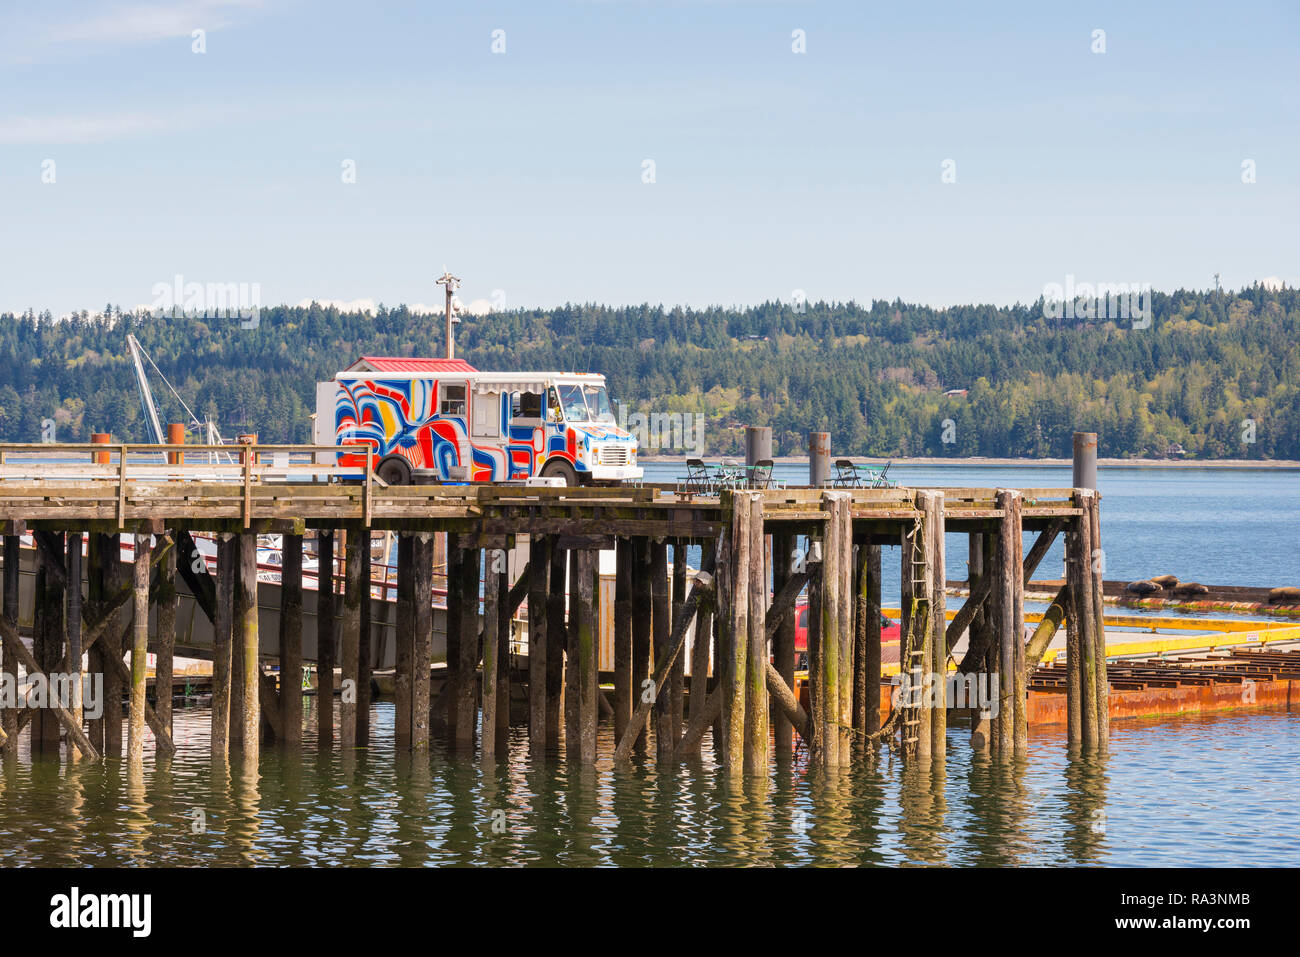 A colourful van selling fast food at a dock on Vancouver Island Stock Photo